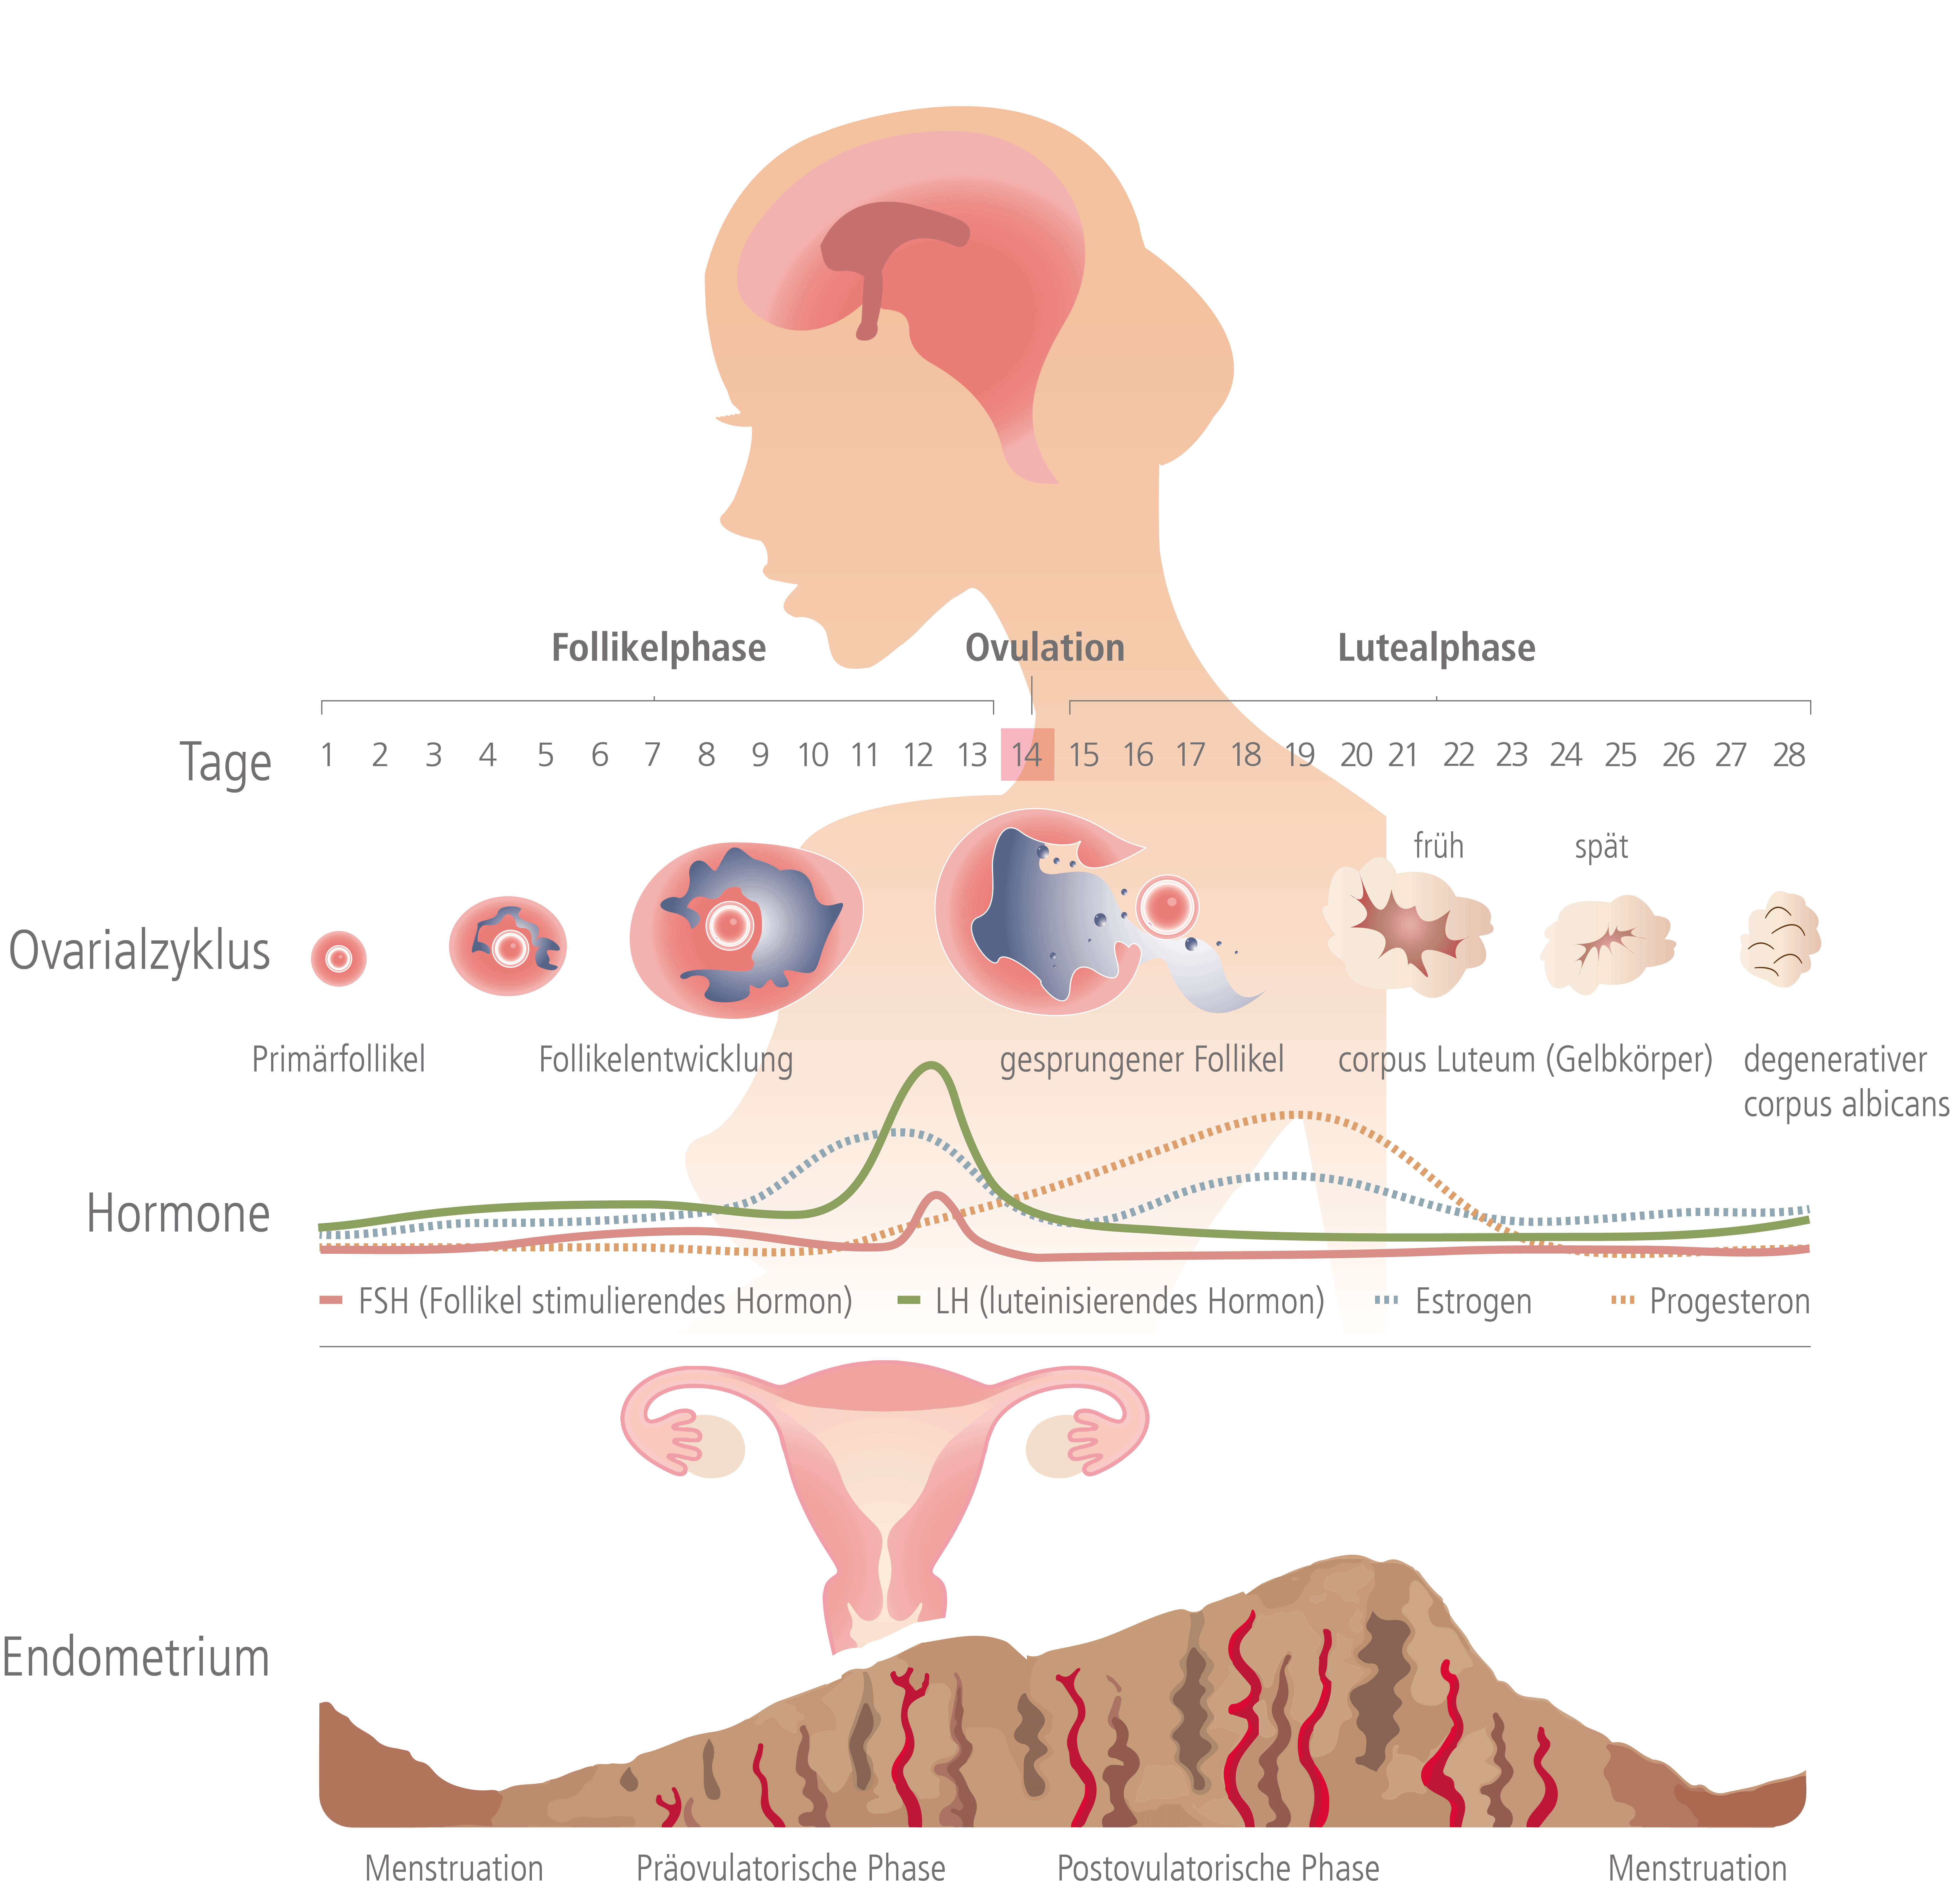 Schematic diagram of hormonal treatment: period of time, ovarian cycle, active hormones, build up of uterine lining │ © 2022 Next Fertility IVF Prof. Zech • Member of Next Clinics
                    